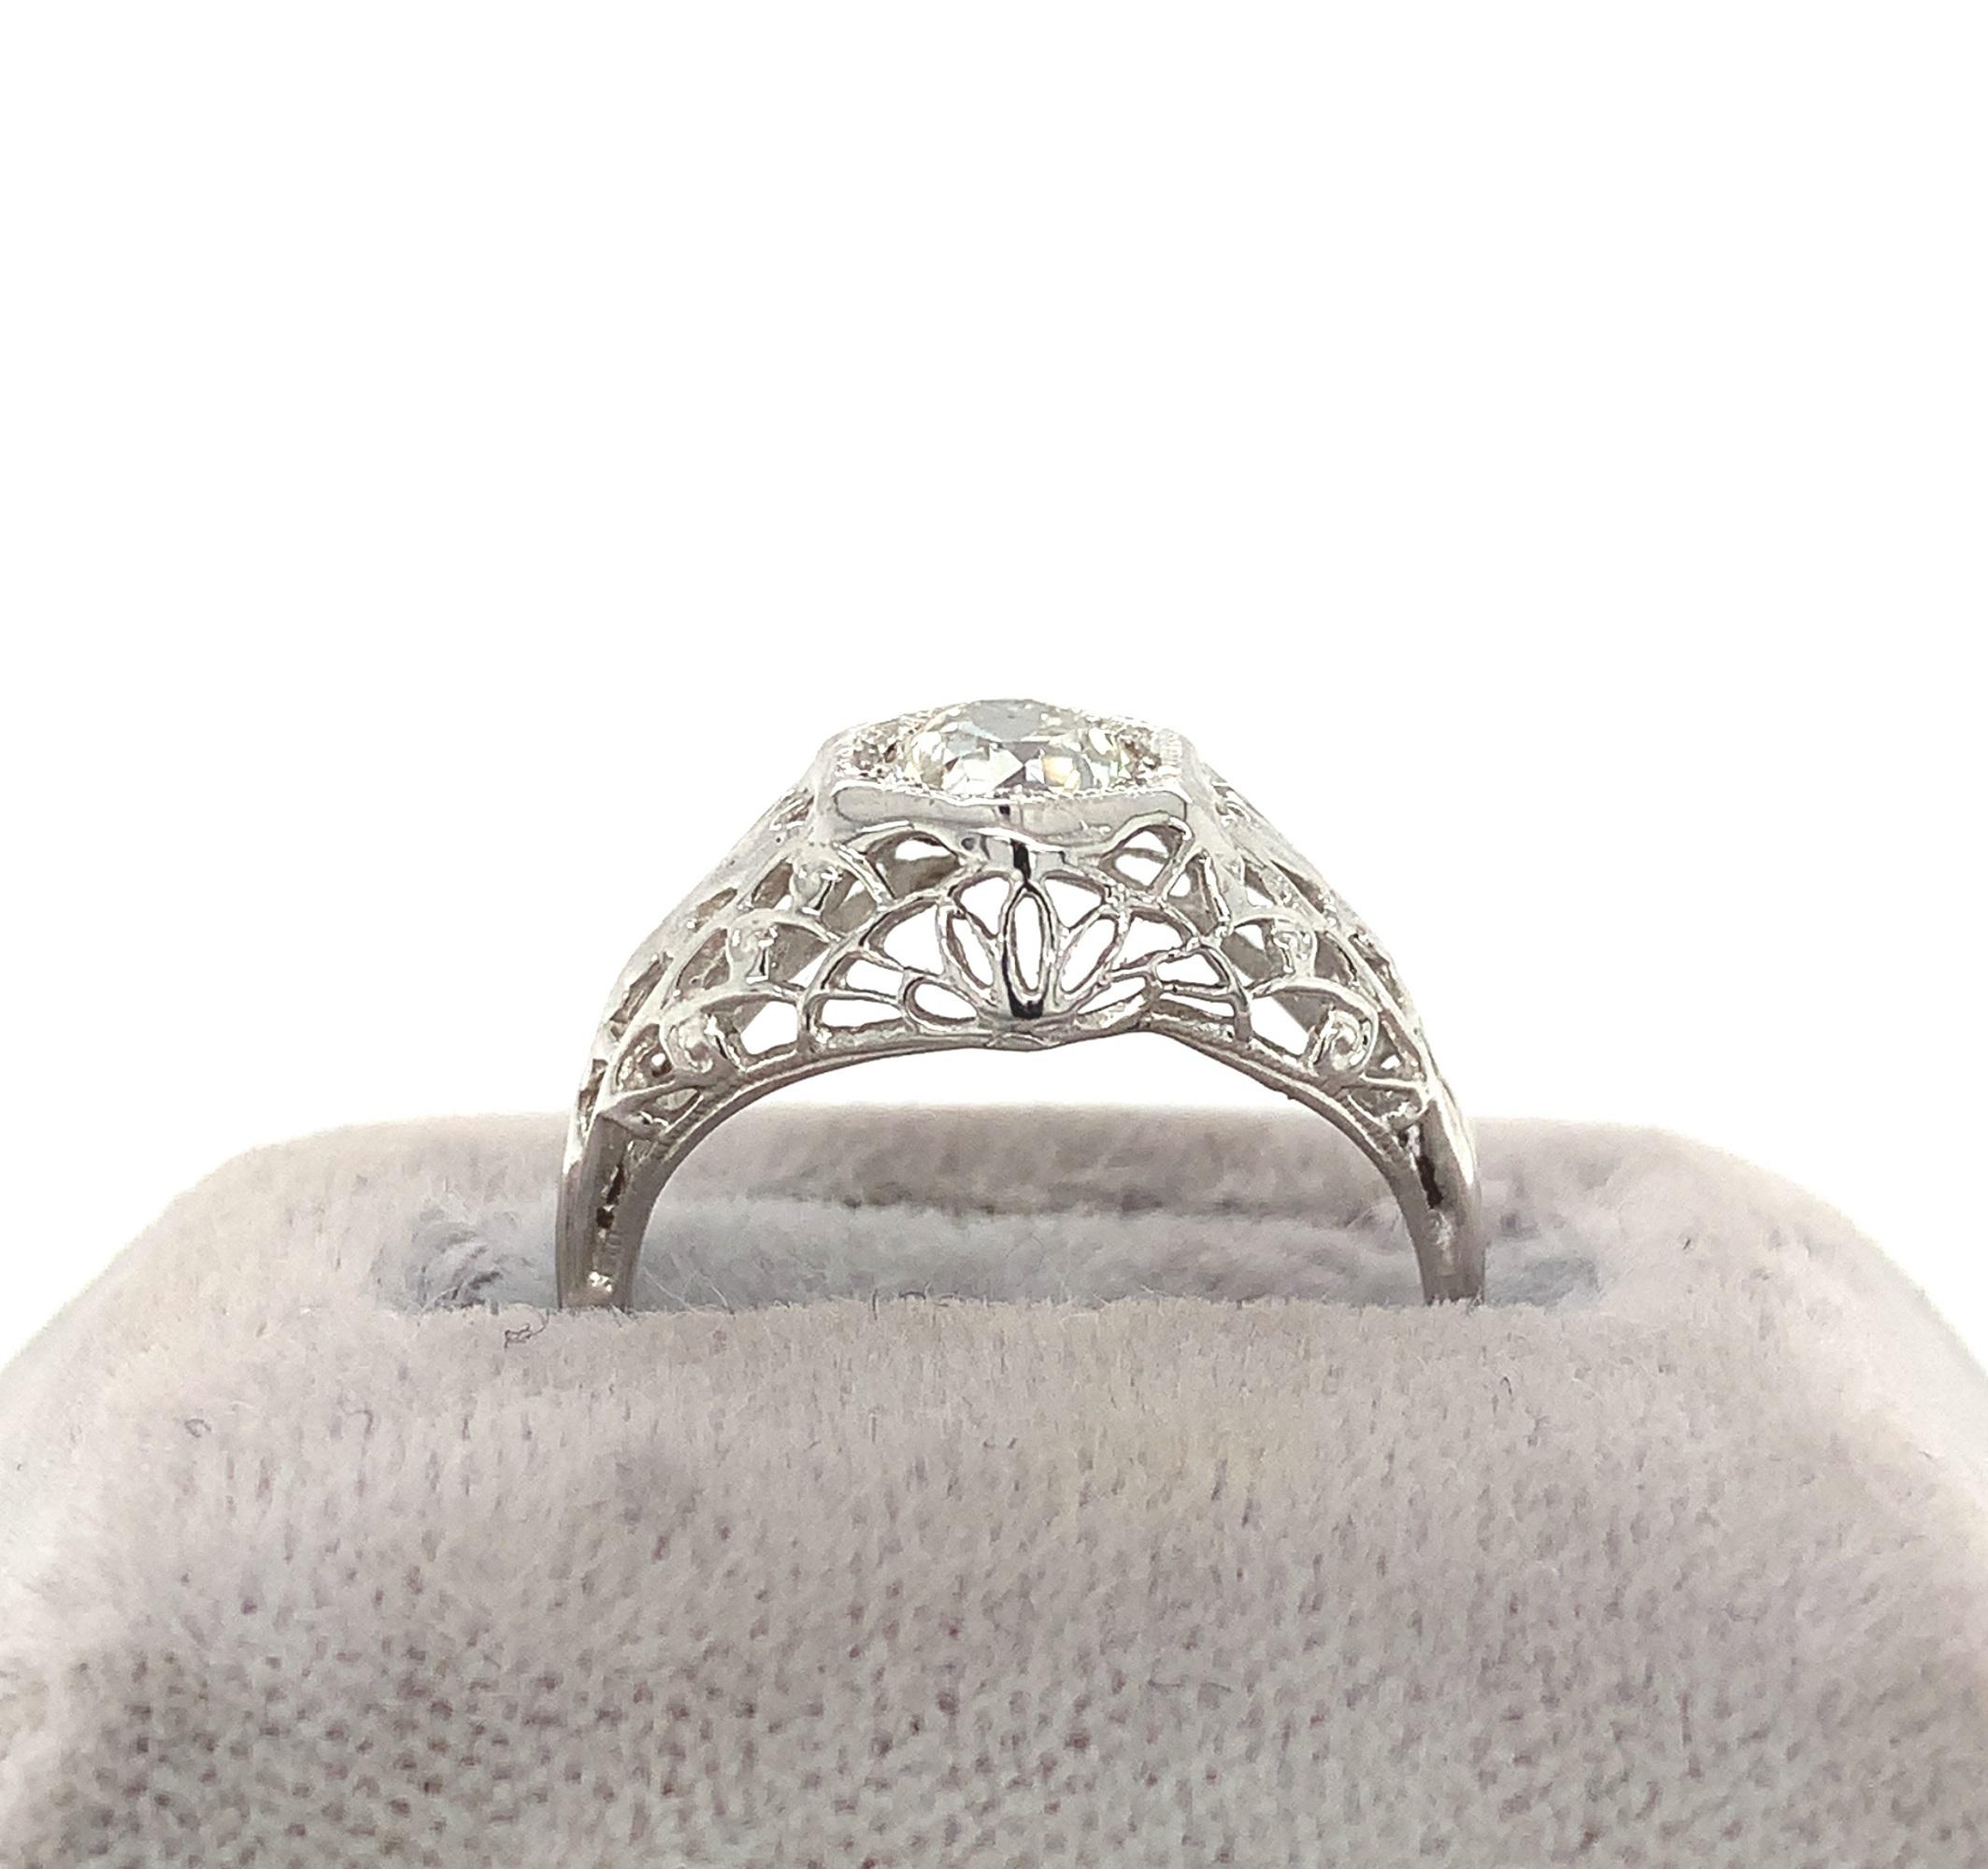 14K white gold filigree ring featuring an European cut diamond weighing about 1/2 carat. The diamond has VS2 clarity and I-J color. It measures about 4.8mm. The antique diamond is set in a delicate domed filigree mounting. The ring fits a size 5 1/2